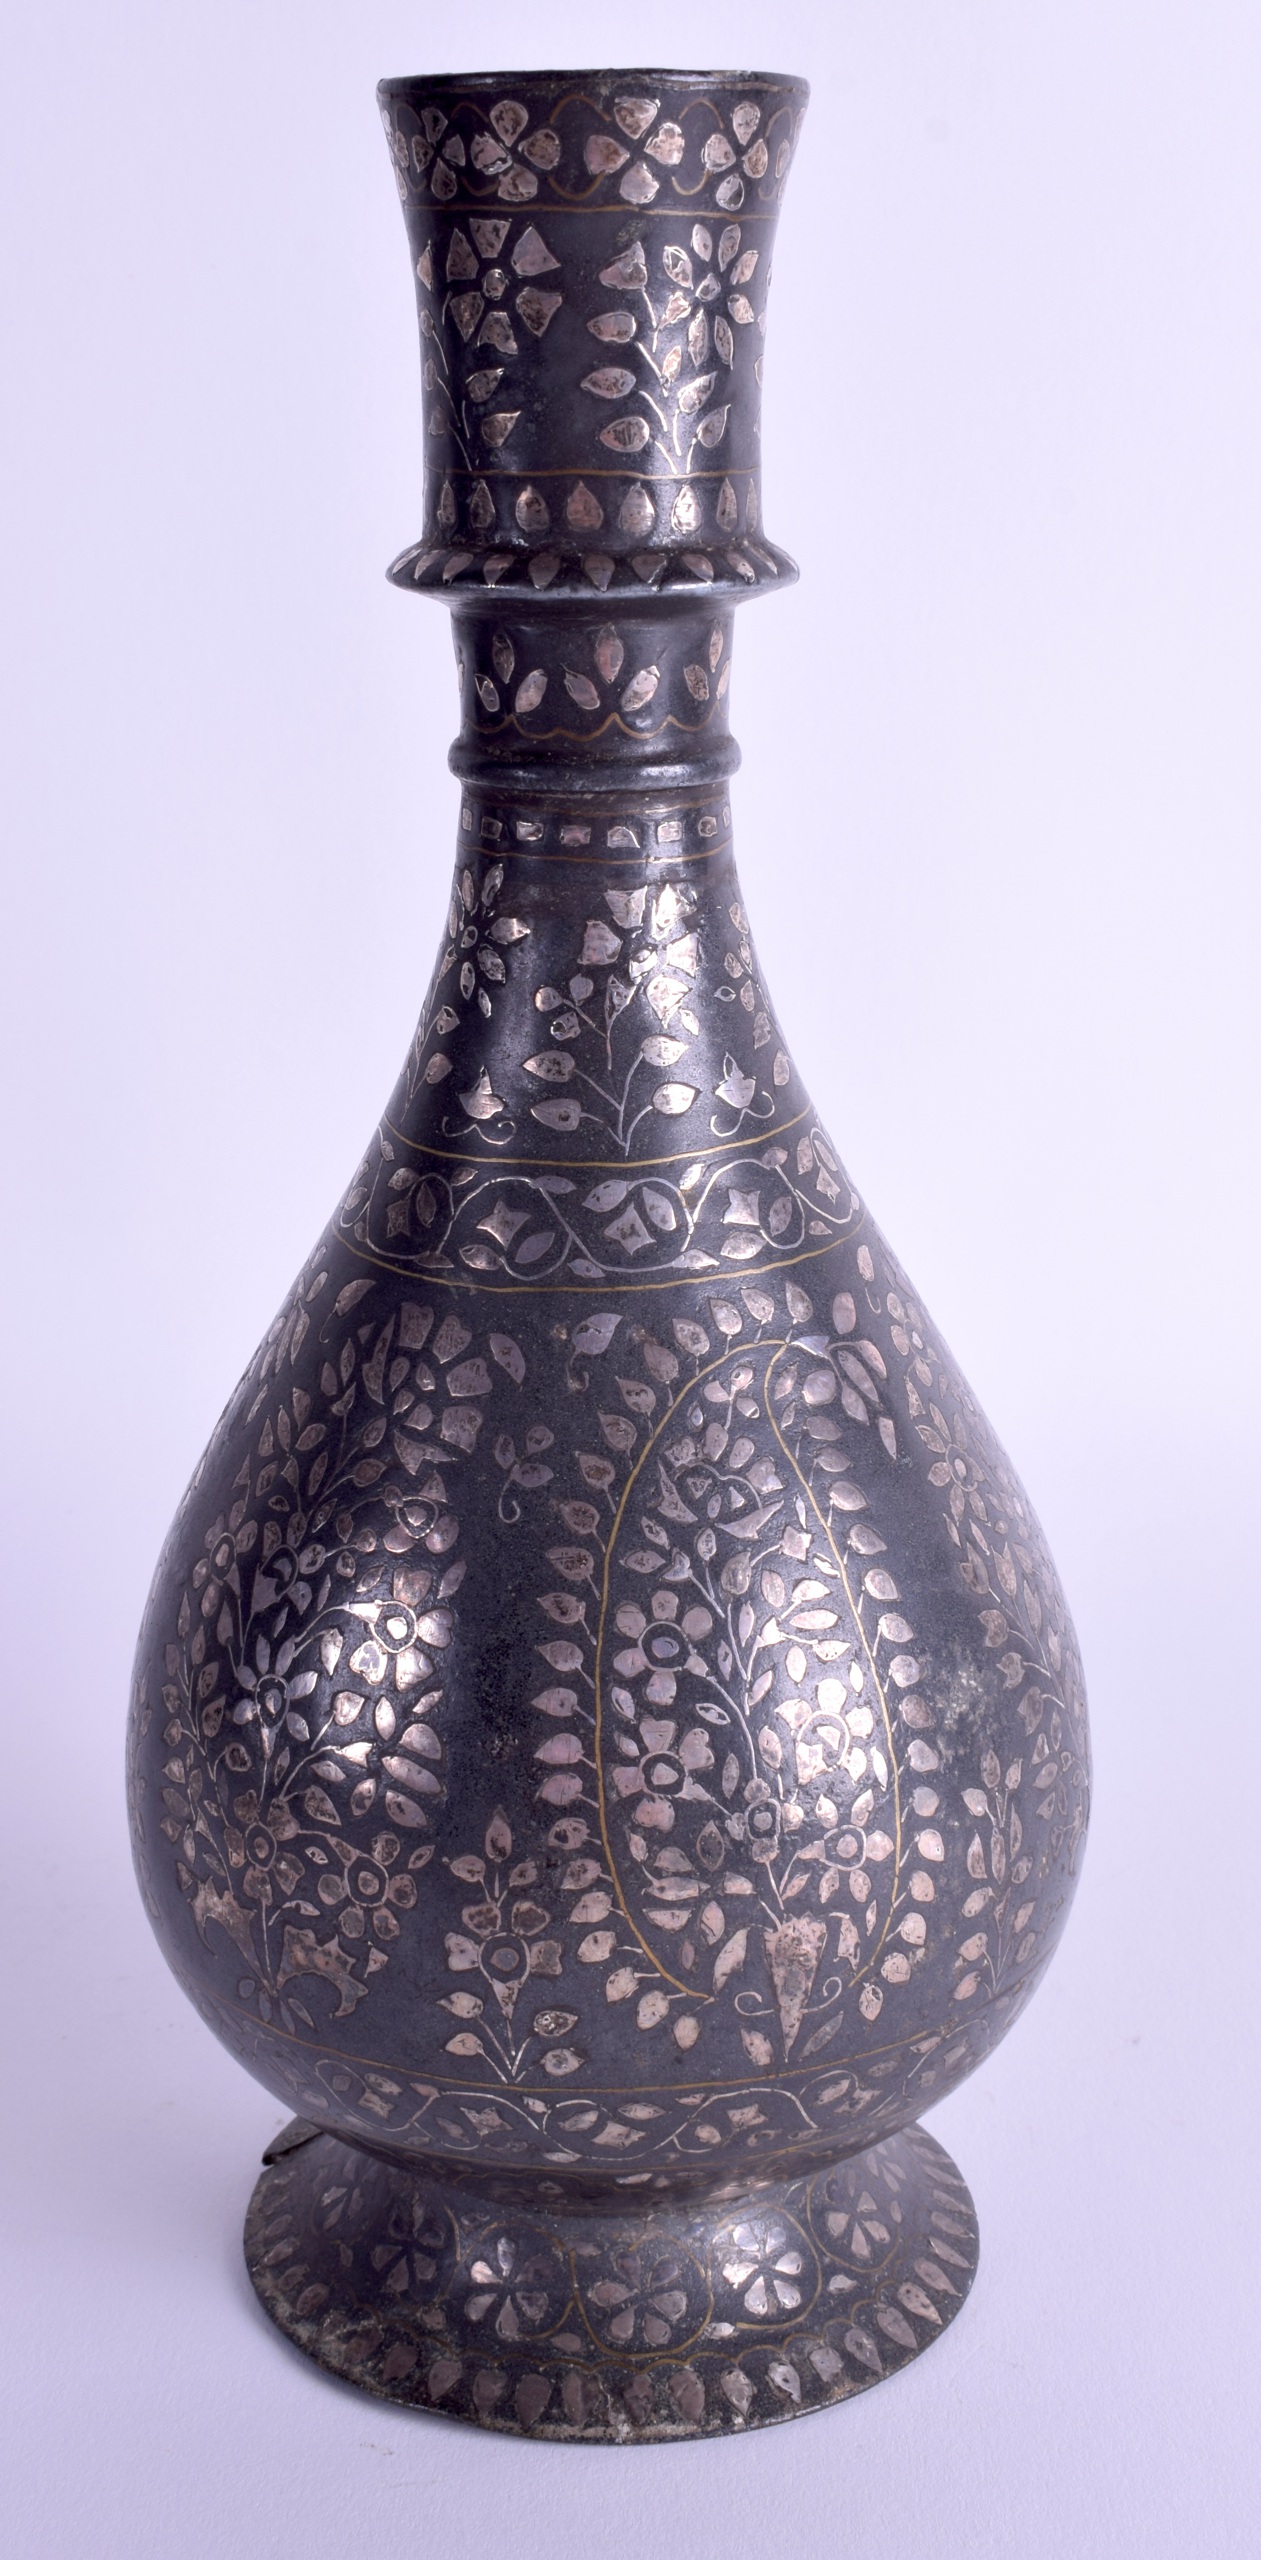 A 19TH CENTURY INDIAN SILVER INLAID BIDRI BRONZE VASE decorated with foliage. 25 cm high. - Image 2 of 3